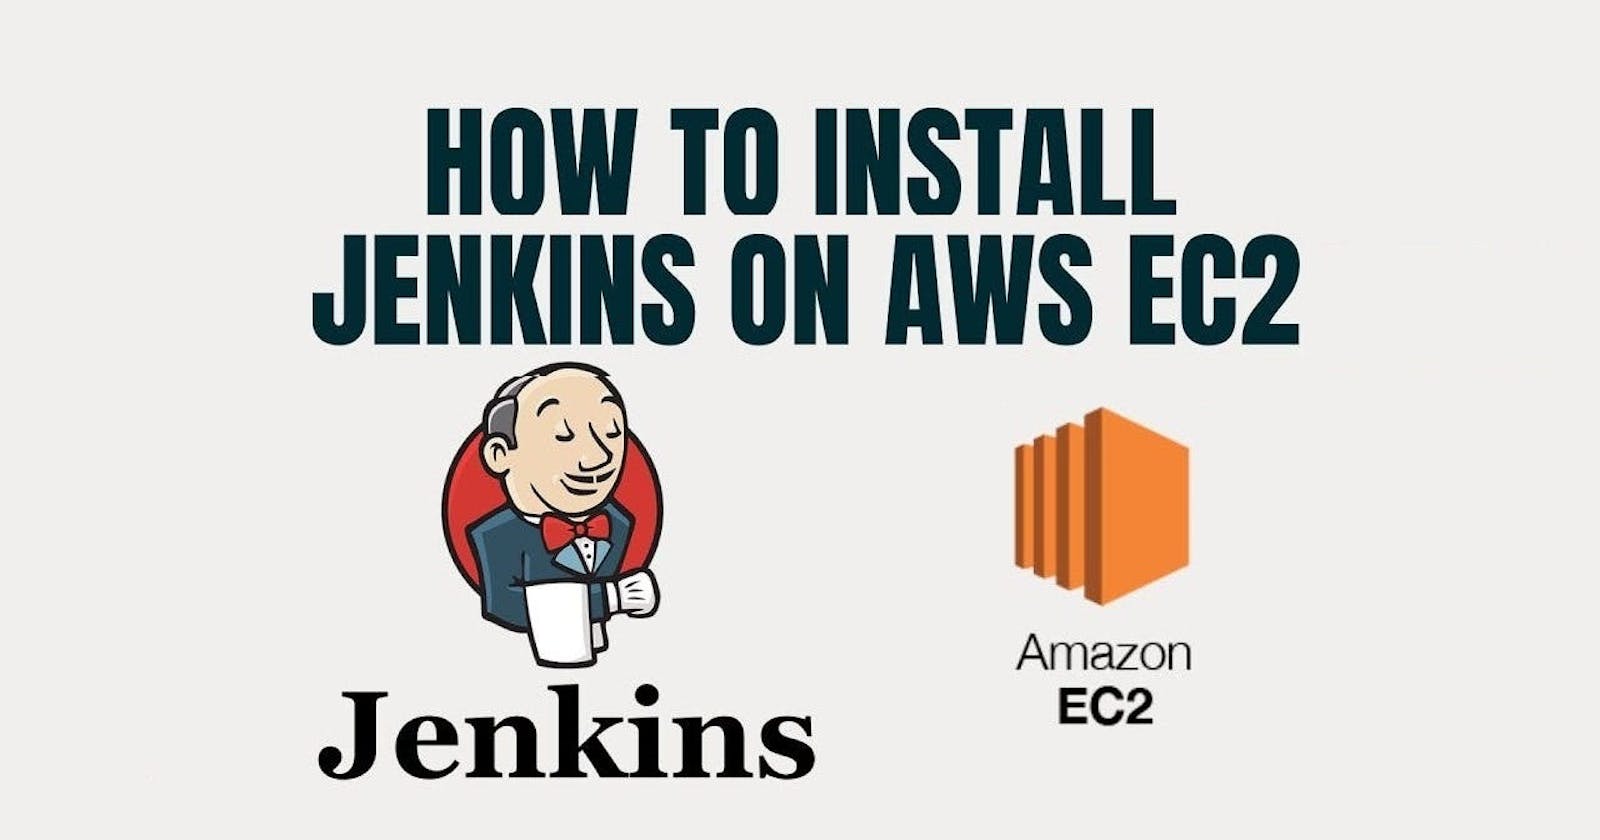 Setting Up Jenkins on AWS Linux: A Step-by-Step Guide